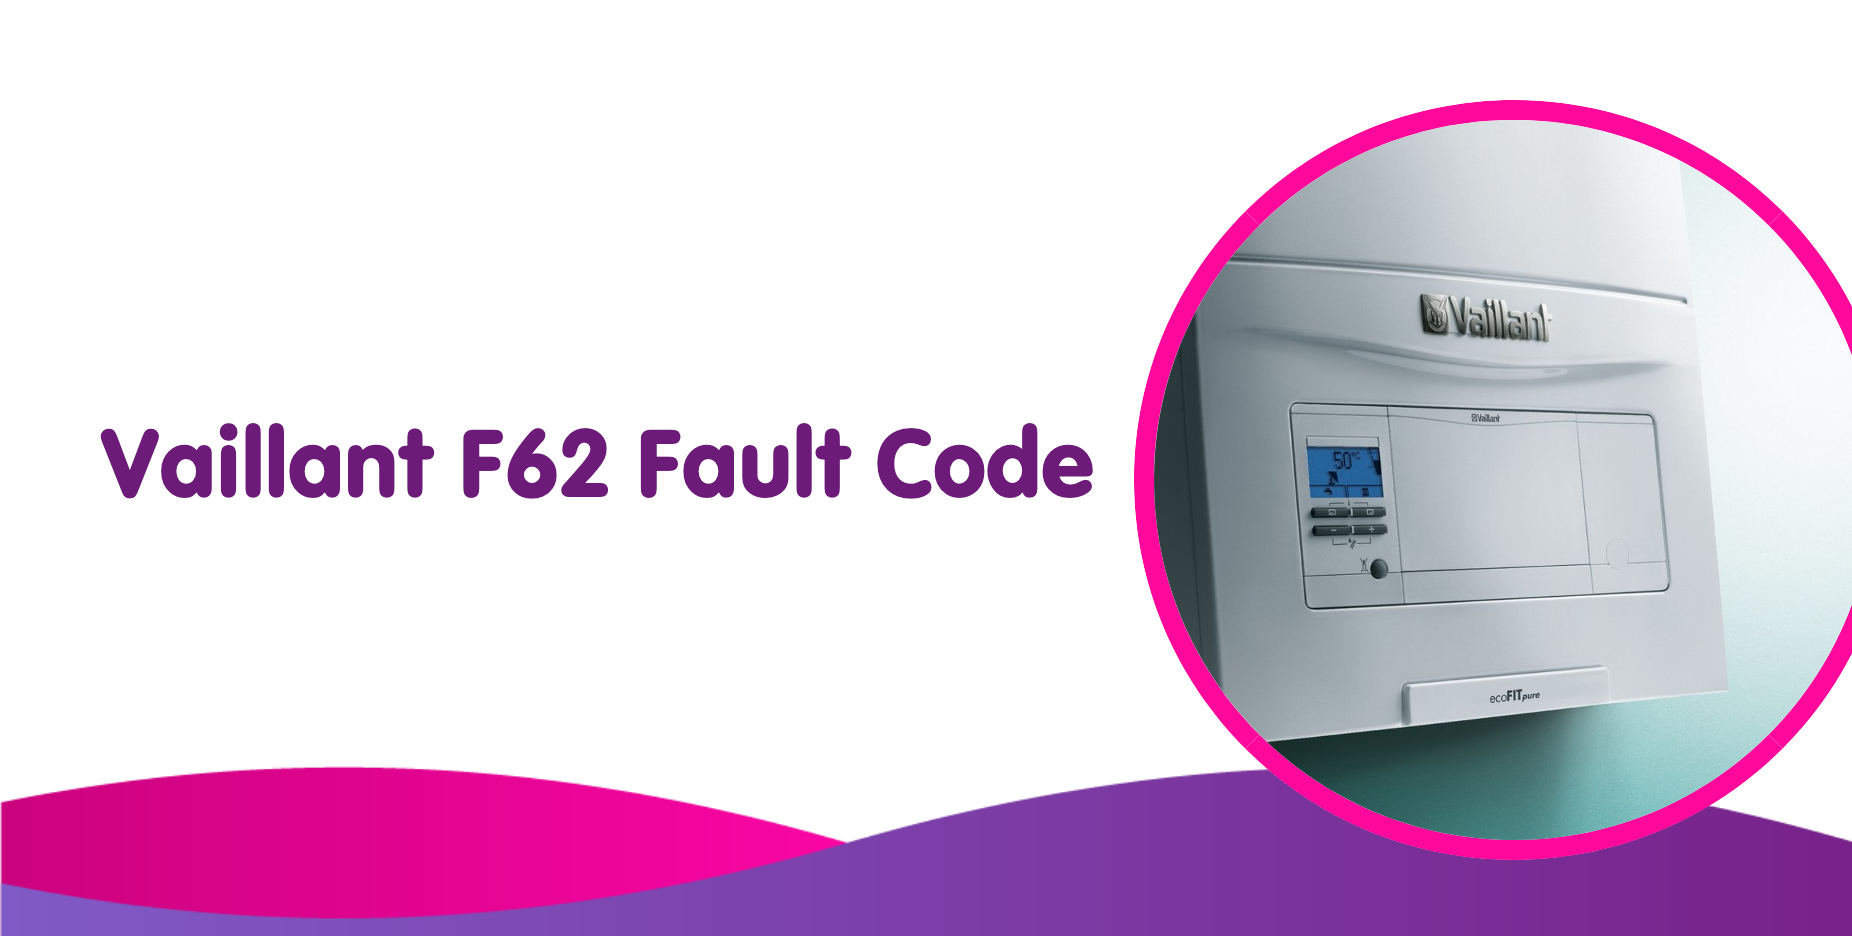 Vaillant F62 Fault Code Meaning, Causes & How To Fix It